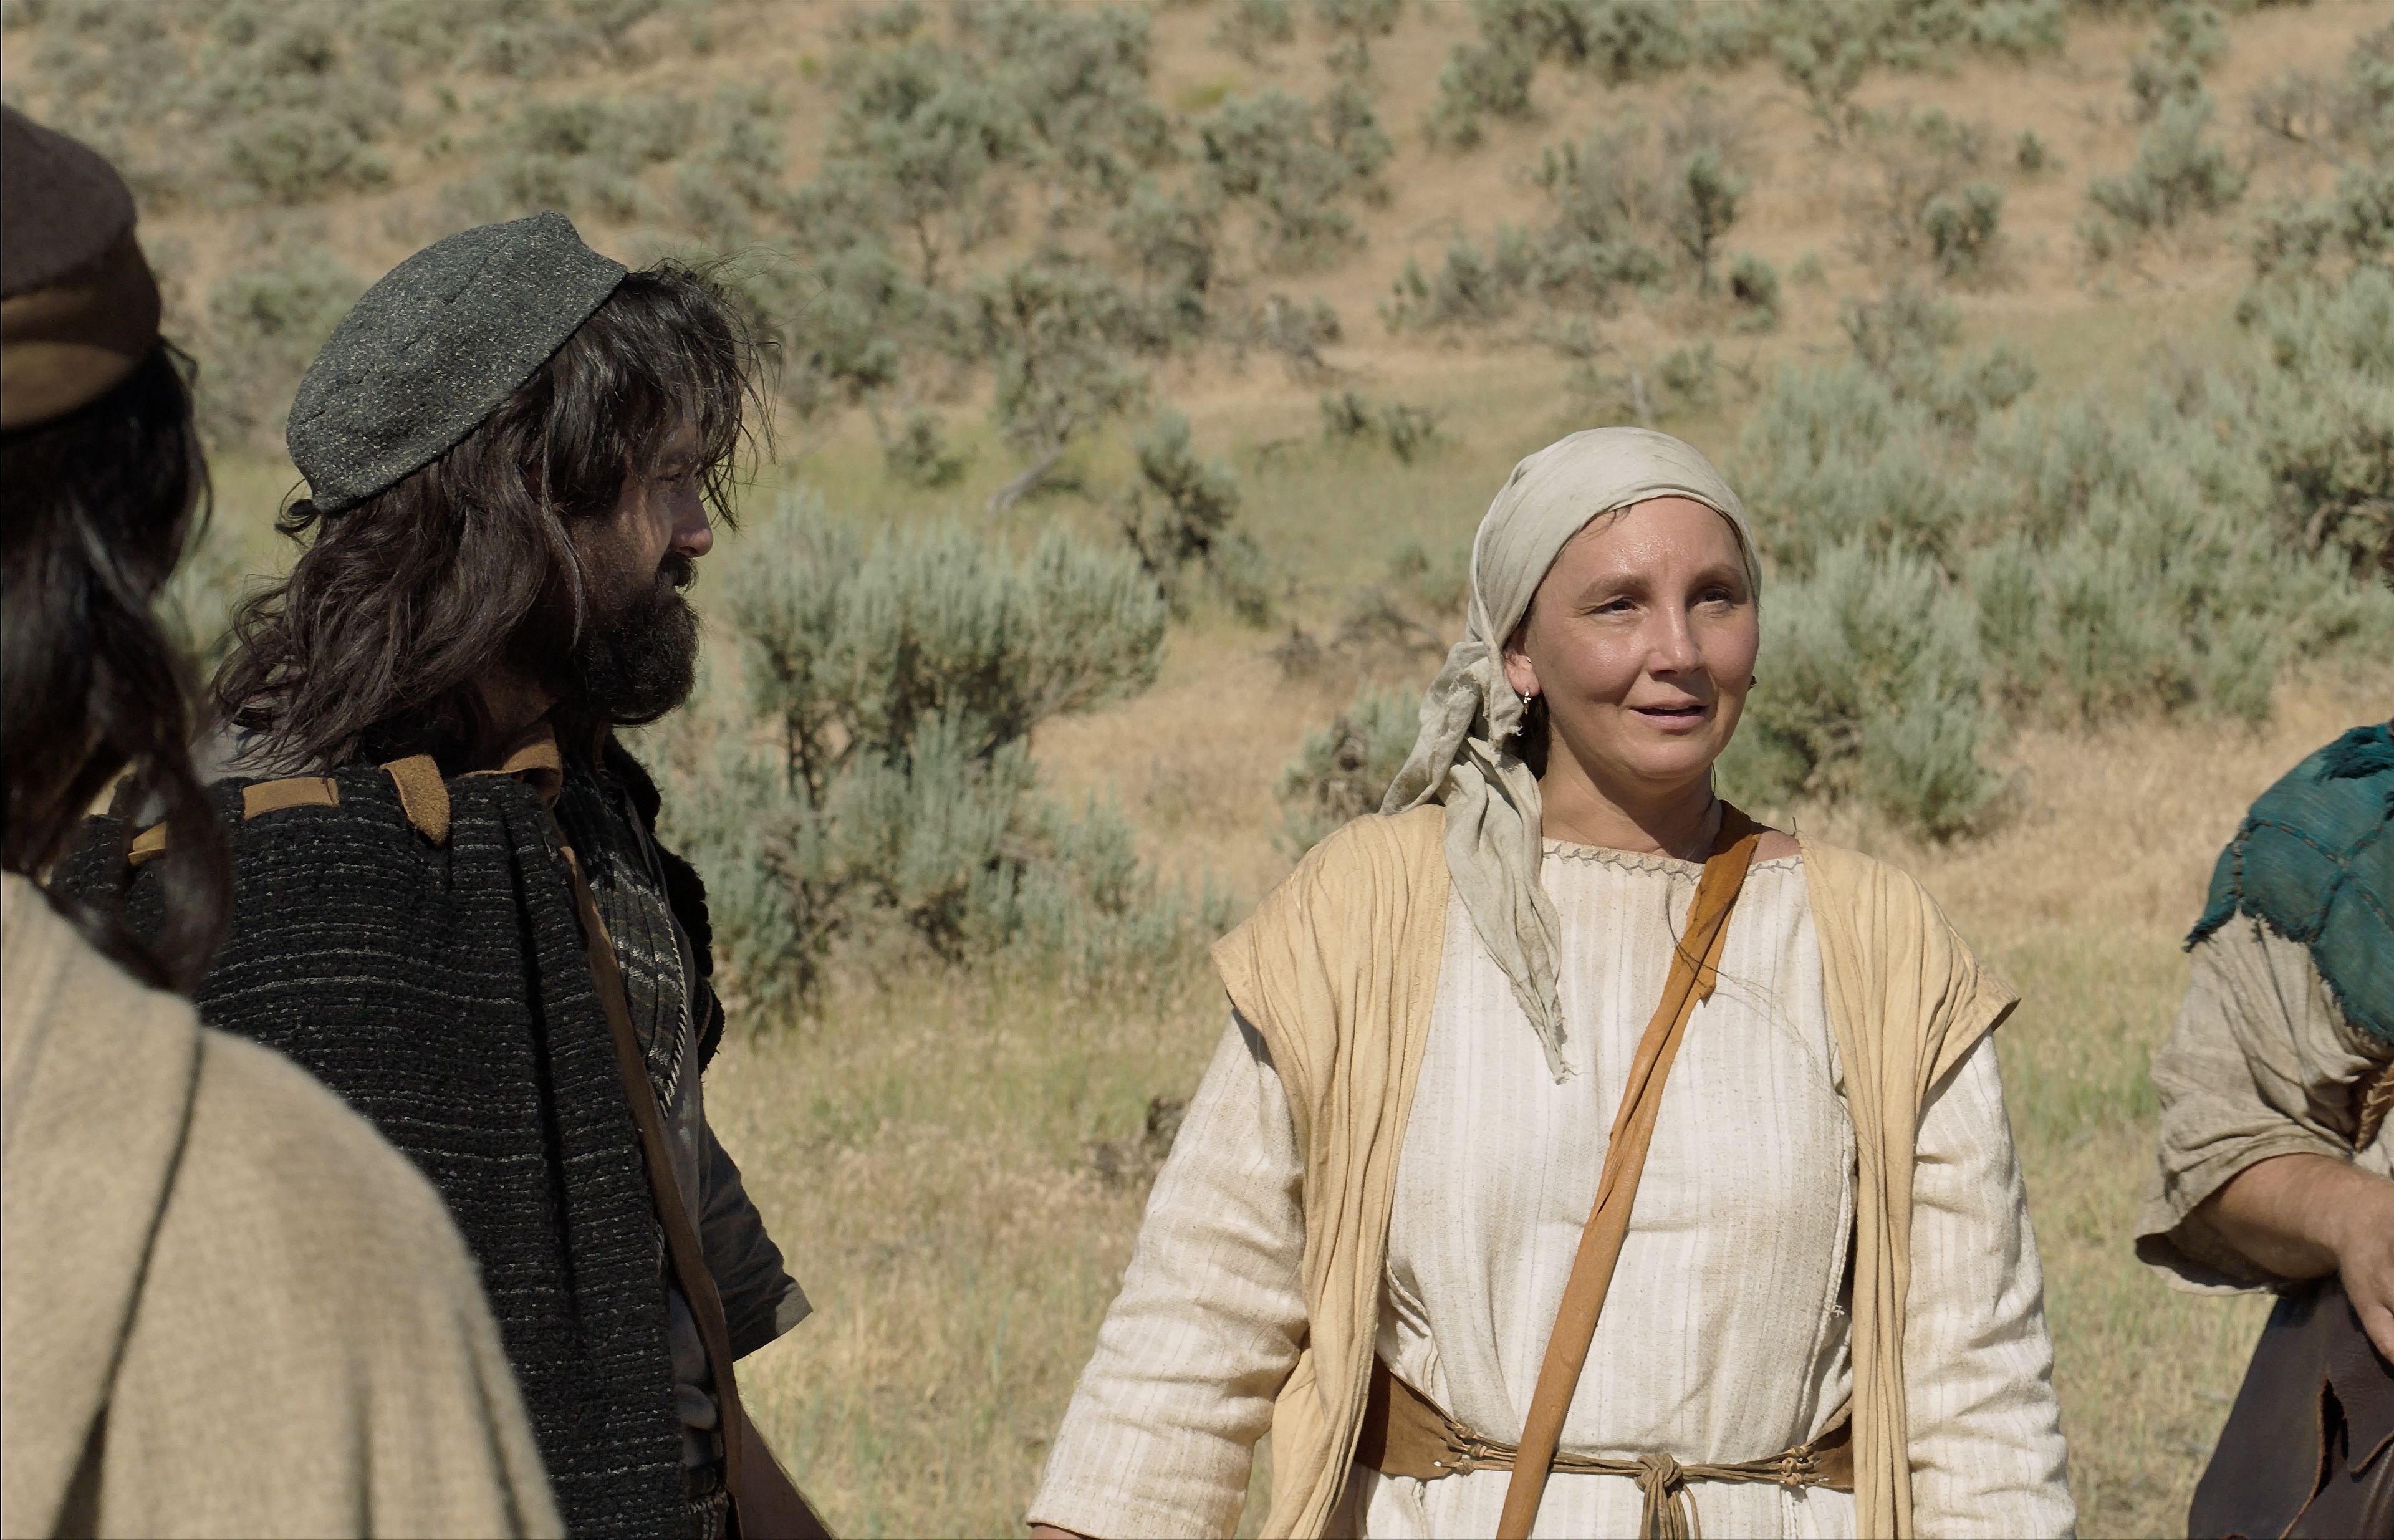 Sariah greets her sons as they return to the camp in the wilderness.